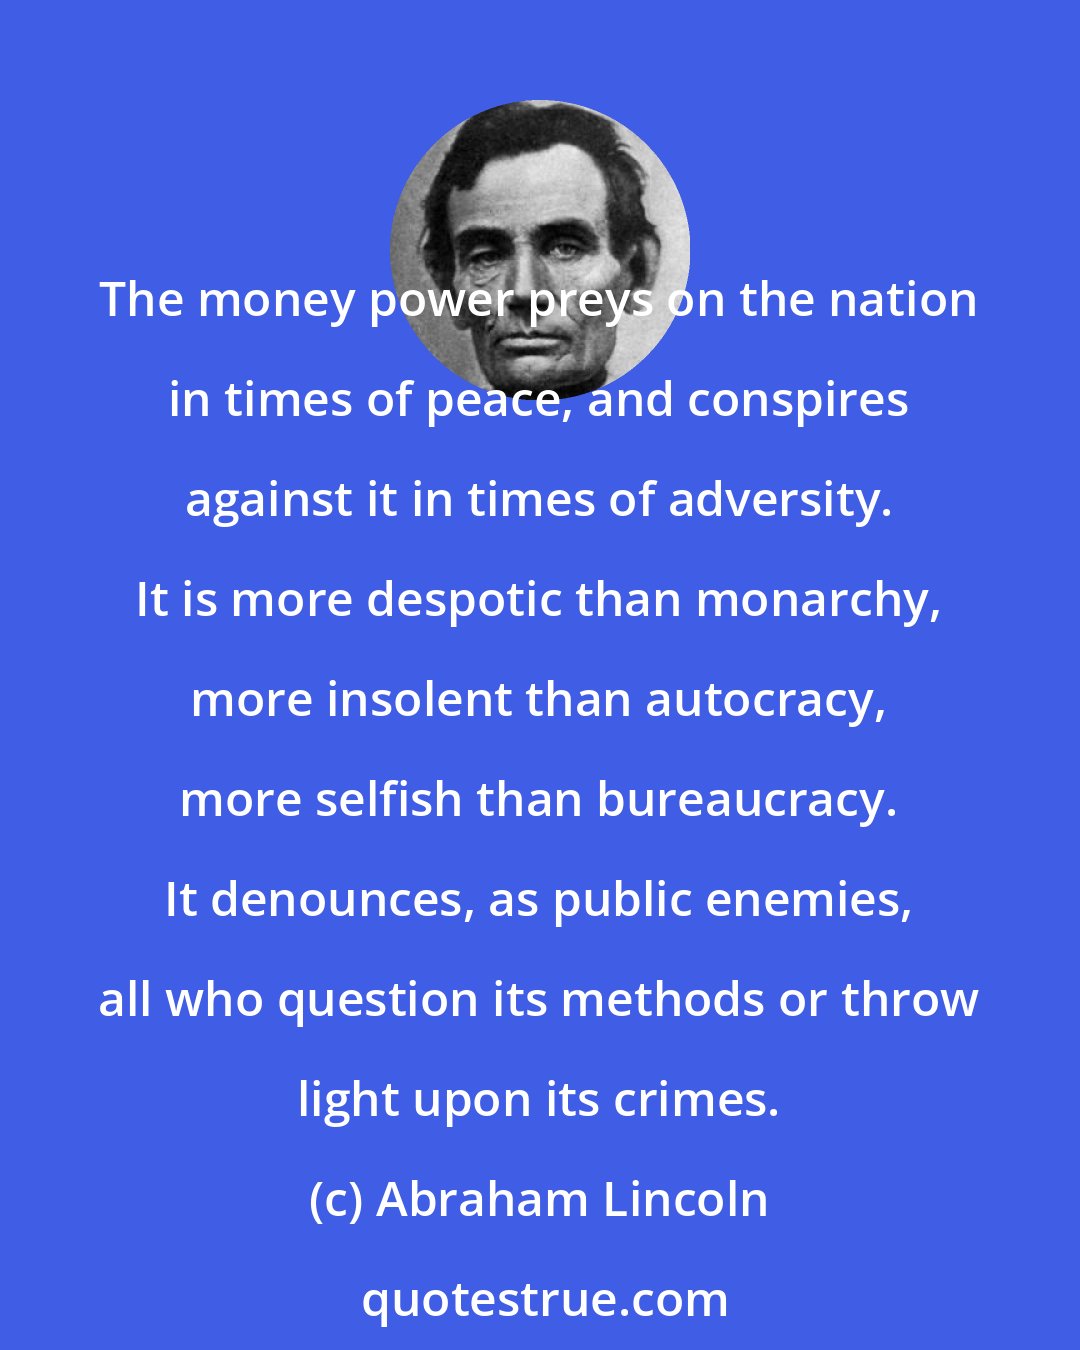 Abraham Lincoln: The money power preys on the nation in times of peace, and conspires against it in times of adversity. It is more despotic than monarchy, more insolent than autocracy, more selfish than bureaucracy. It denounces, as public enemies, all who question its methods or throw light upon its crimes.